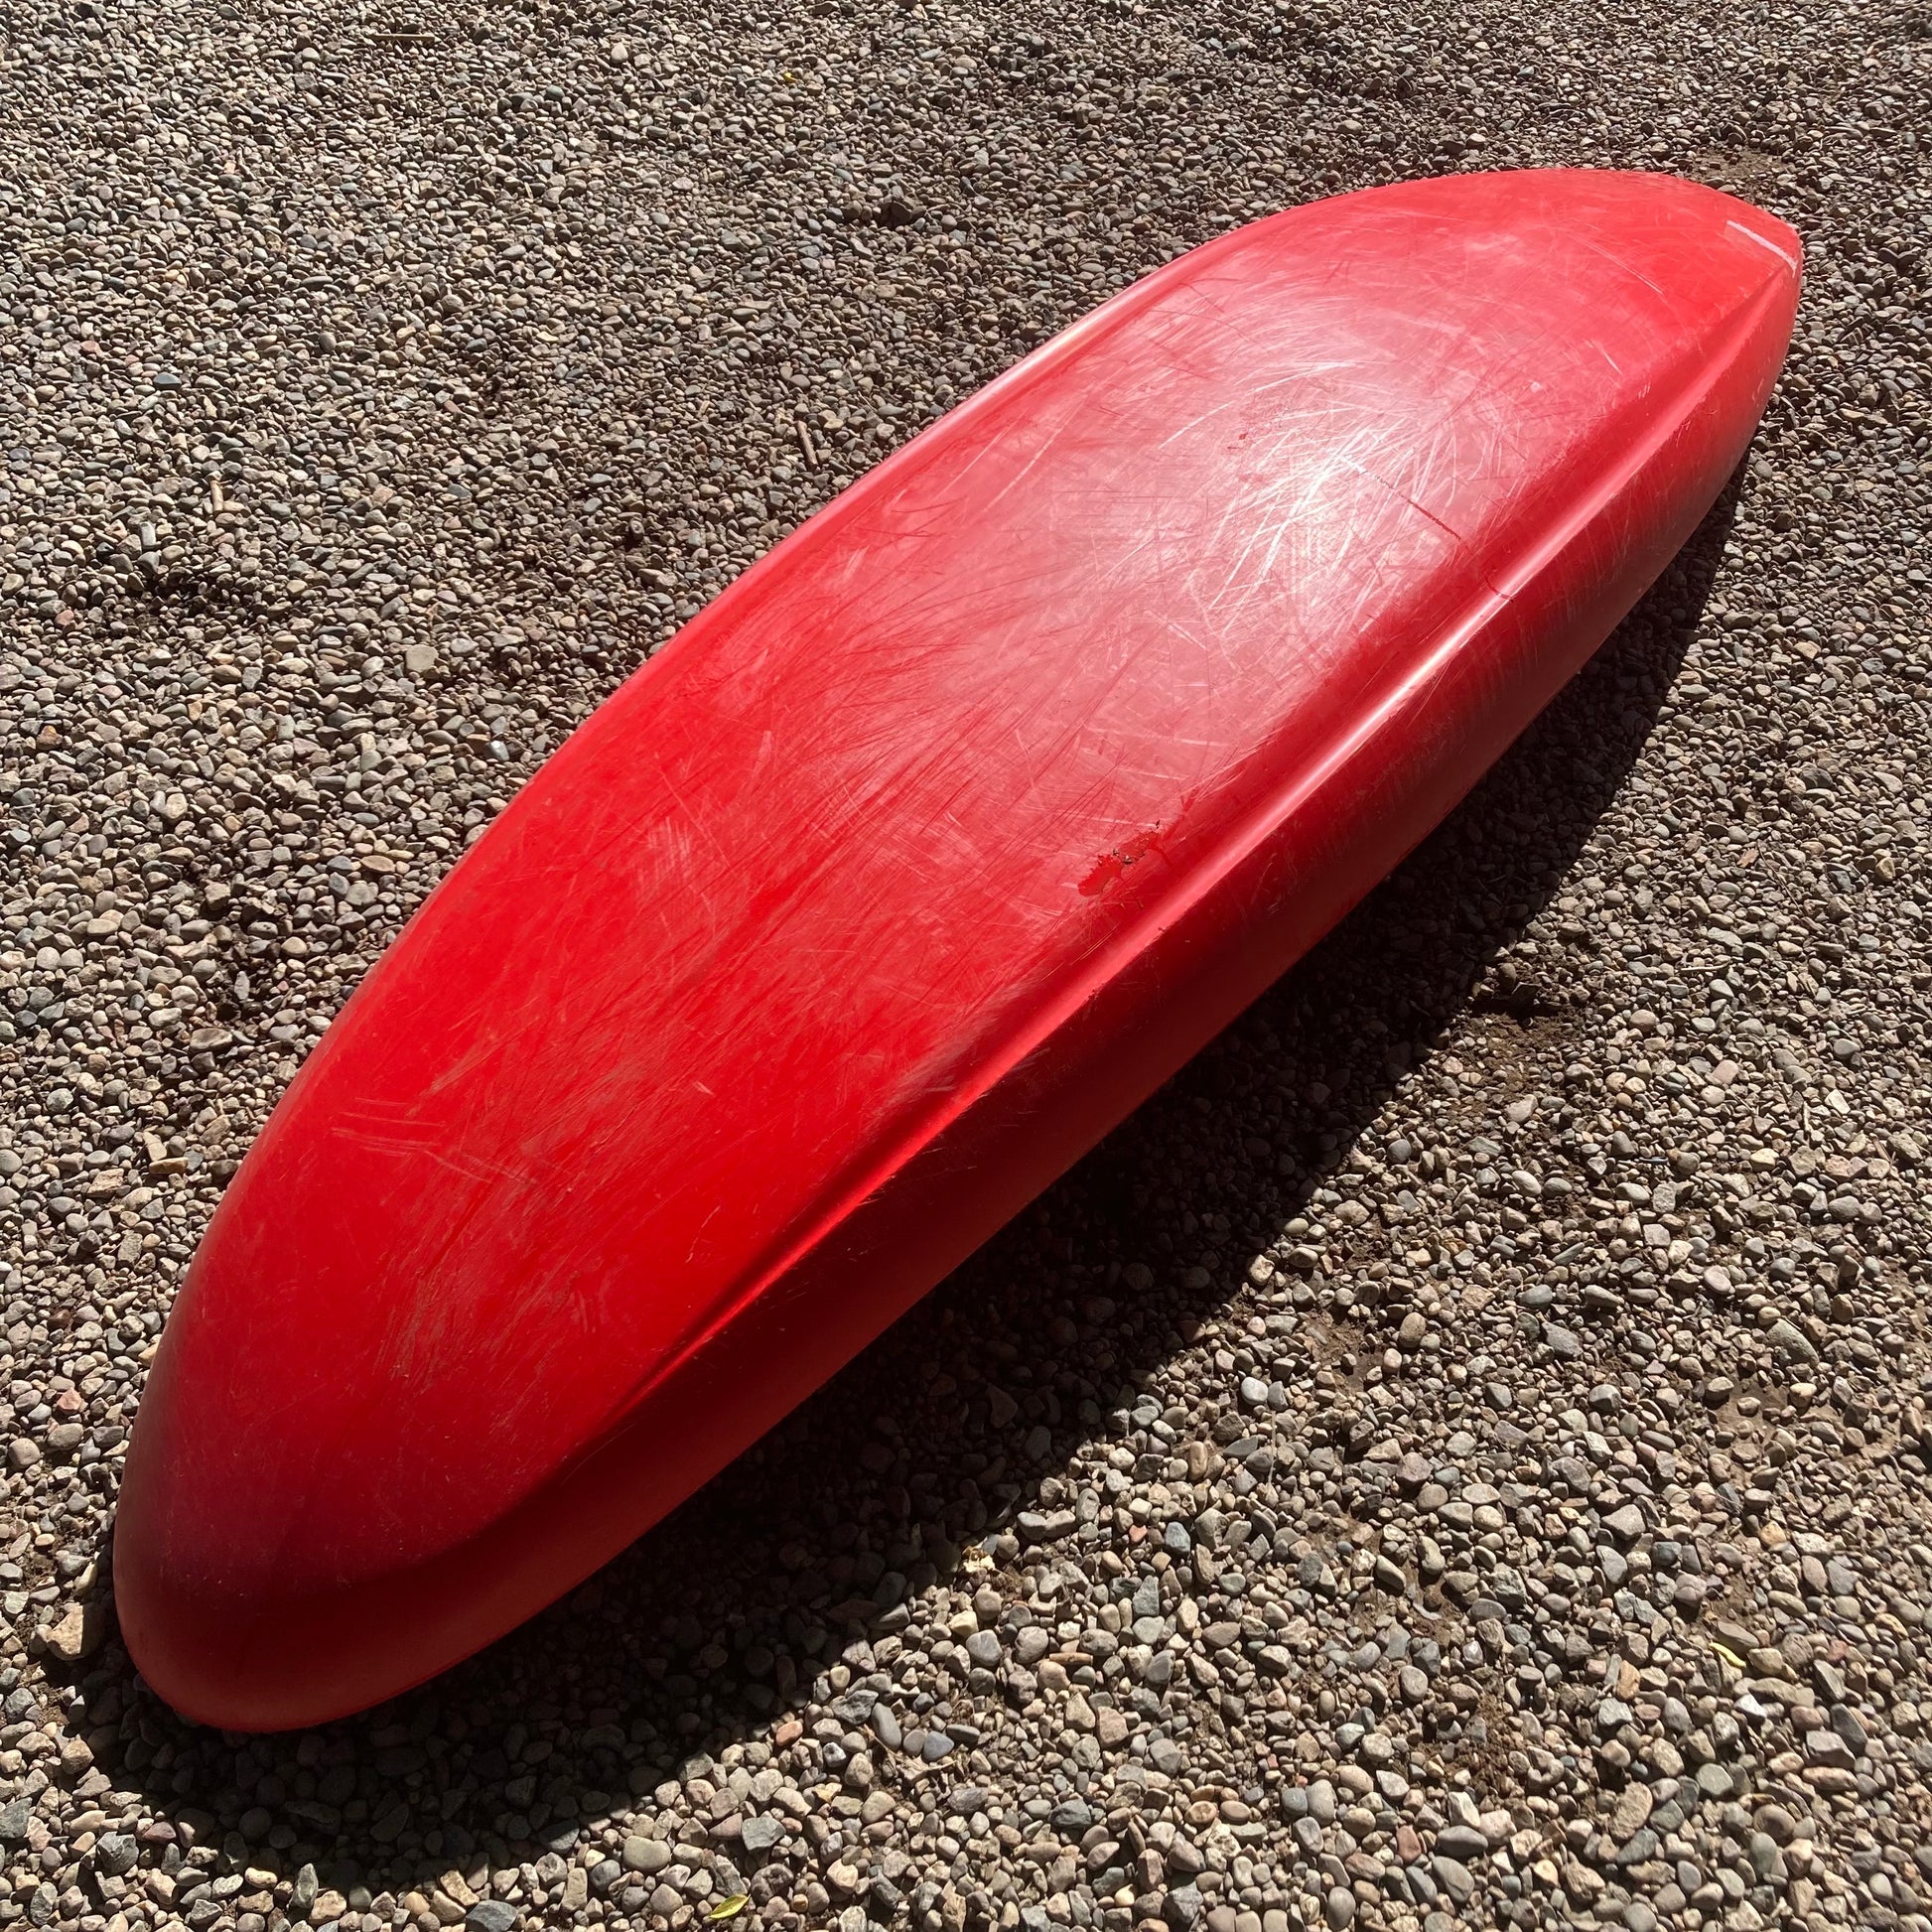 A Demo Gnarvana SM canoe made by Jackson Kayak laying on the ground.